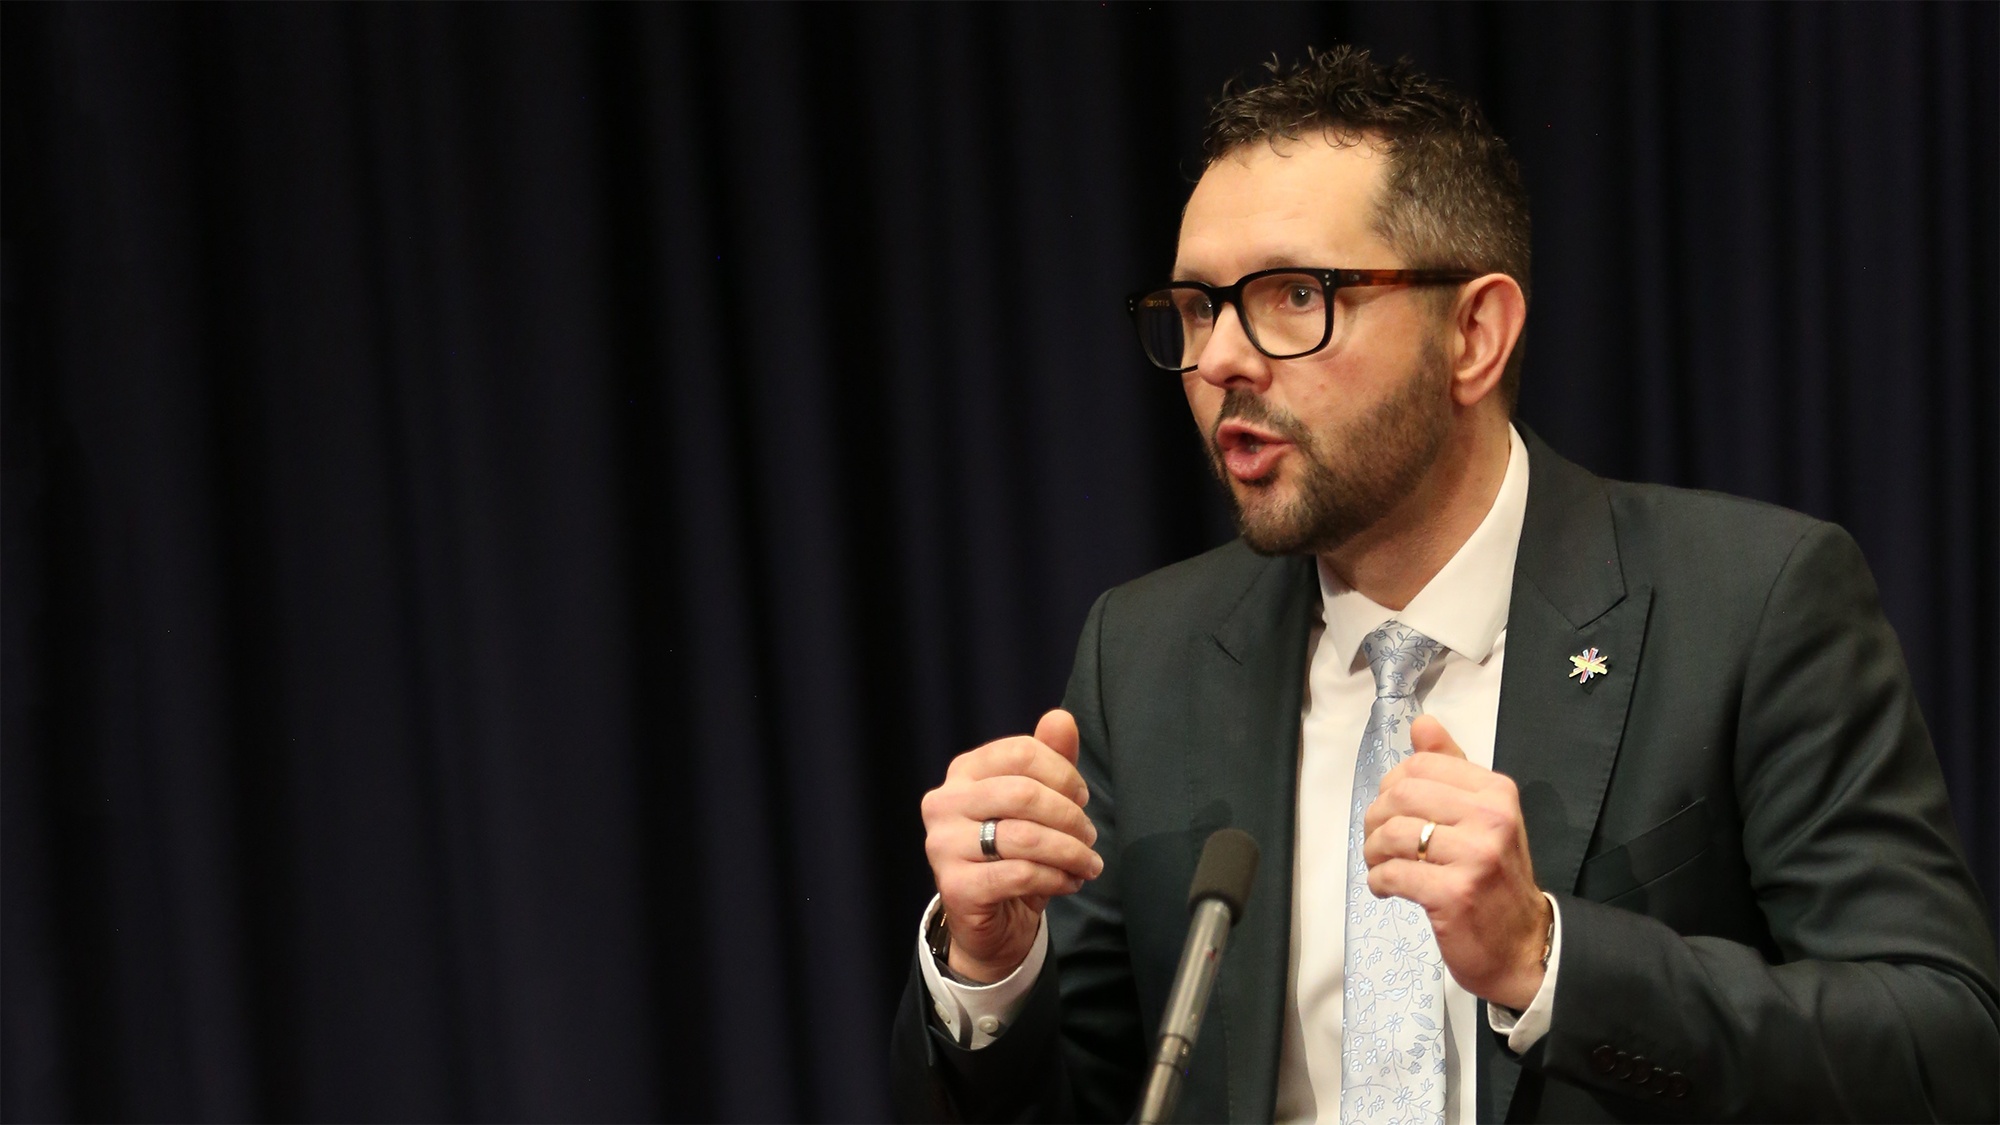 Professor Mark Hutchinson wearing a suit and tie and dark -rimmed glasses speaking at a lecture. Hope Oration.